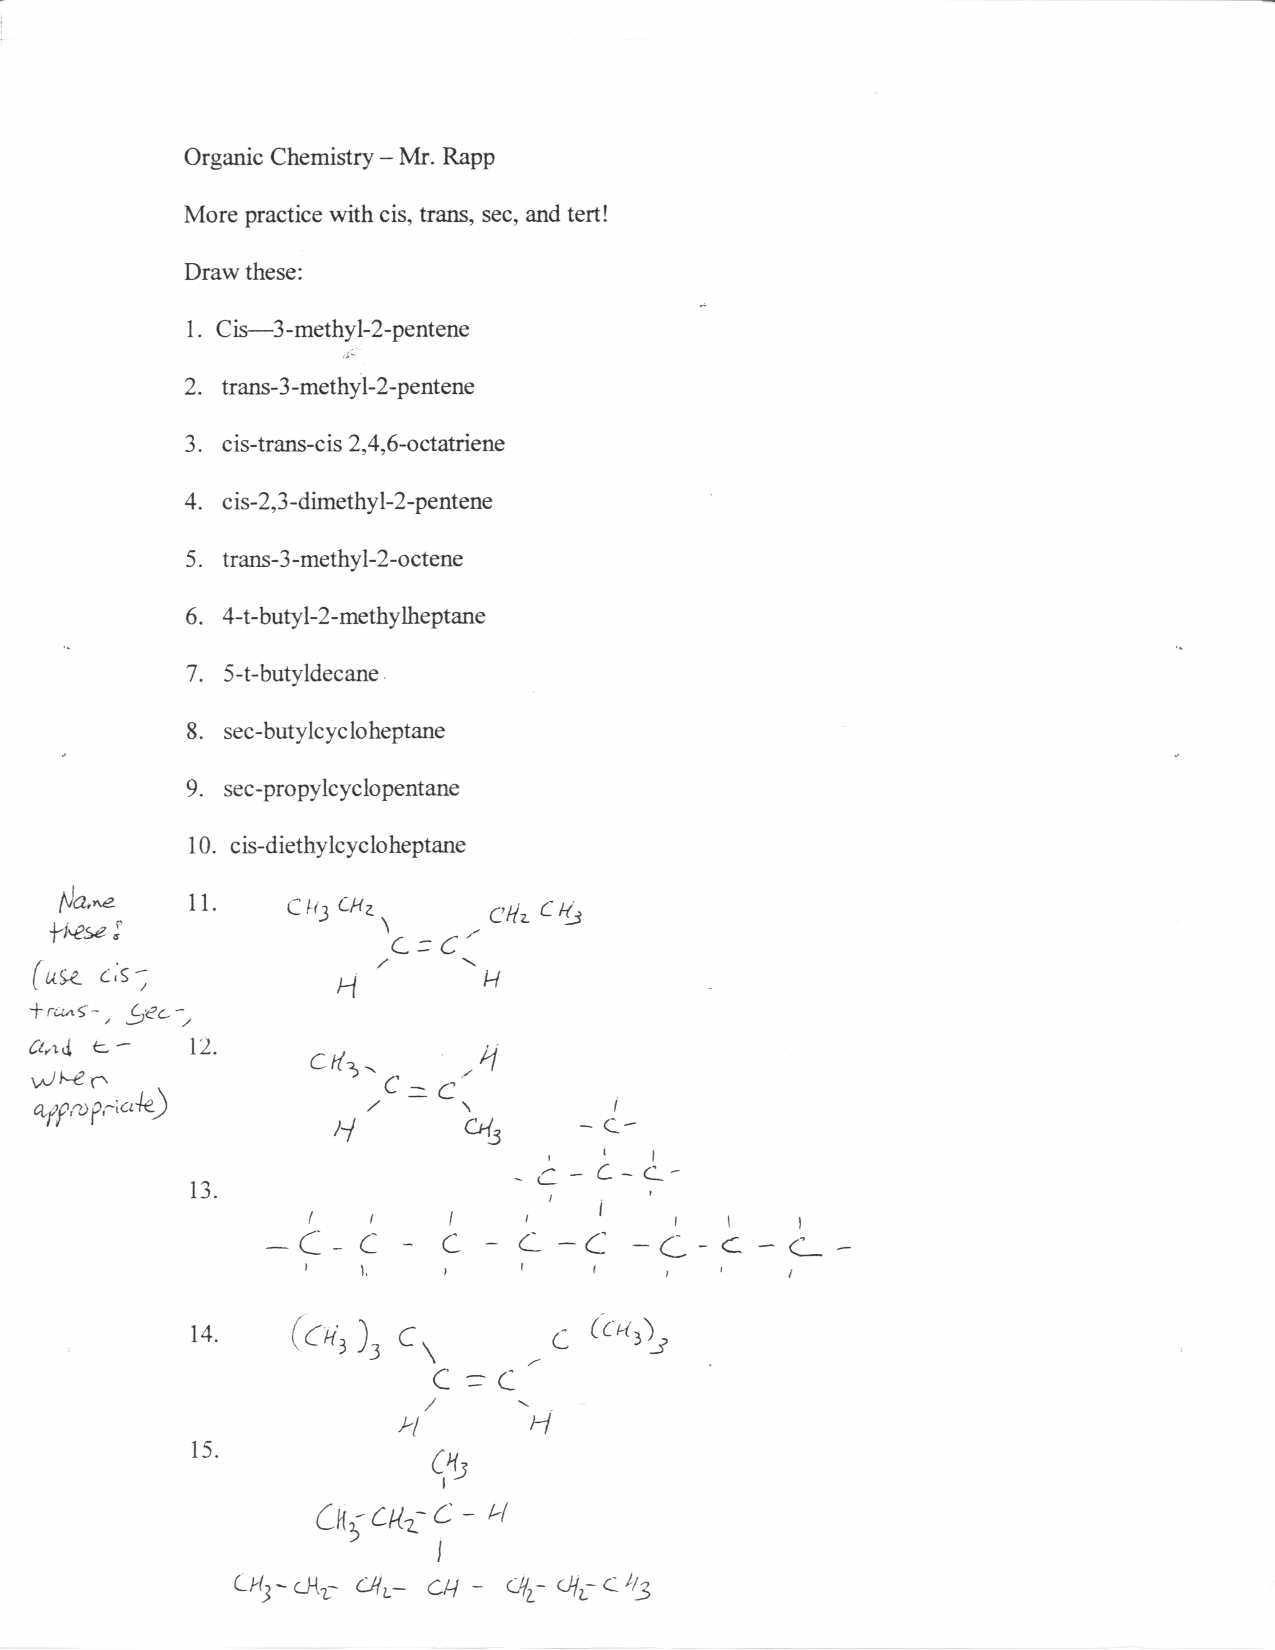 Simple and Compound Interest Practice Worksheet Answer Key together with 45 Introduction to Chemistry Worksheet Best 20 Chemistry Worksheets